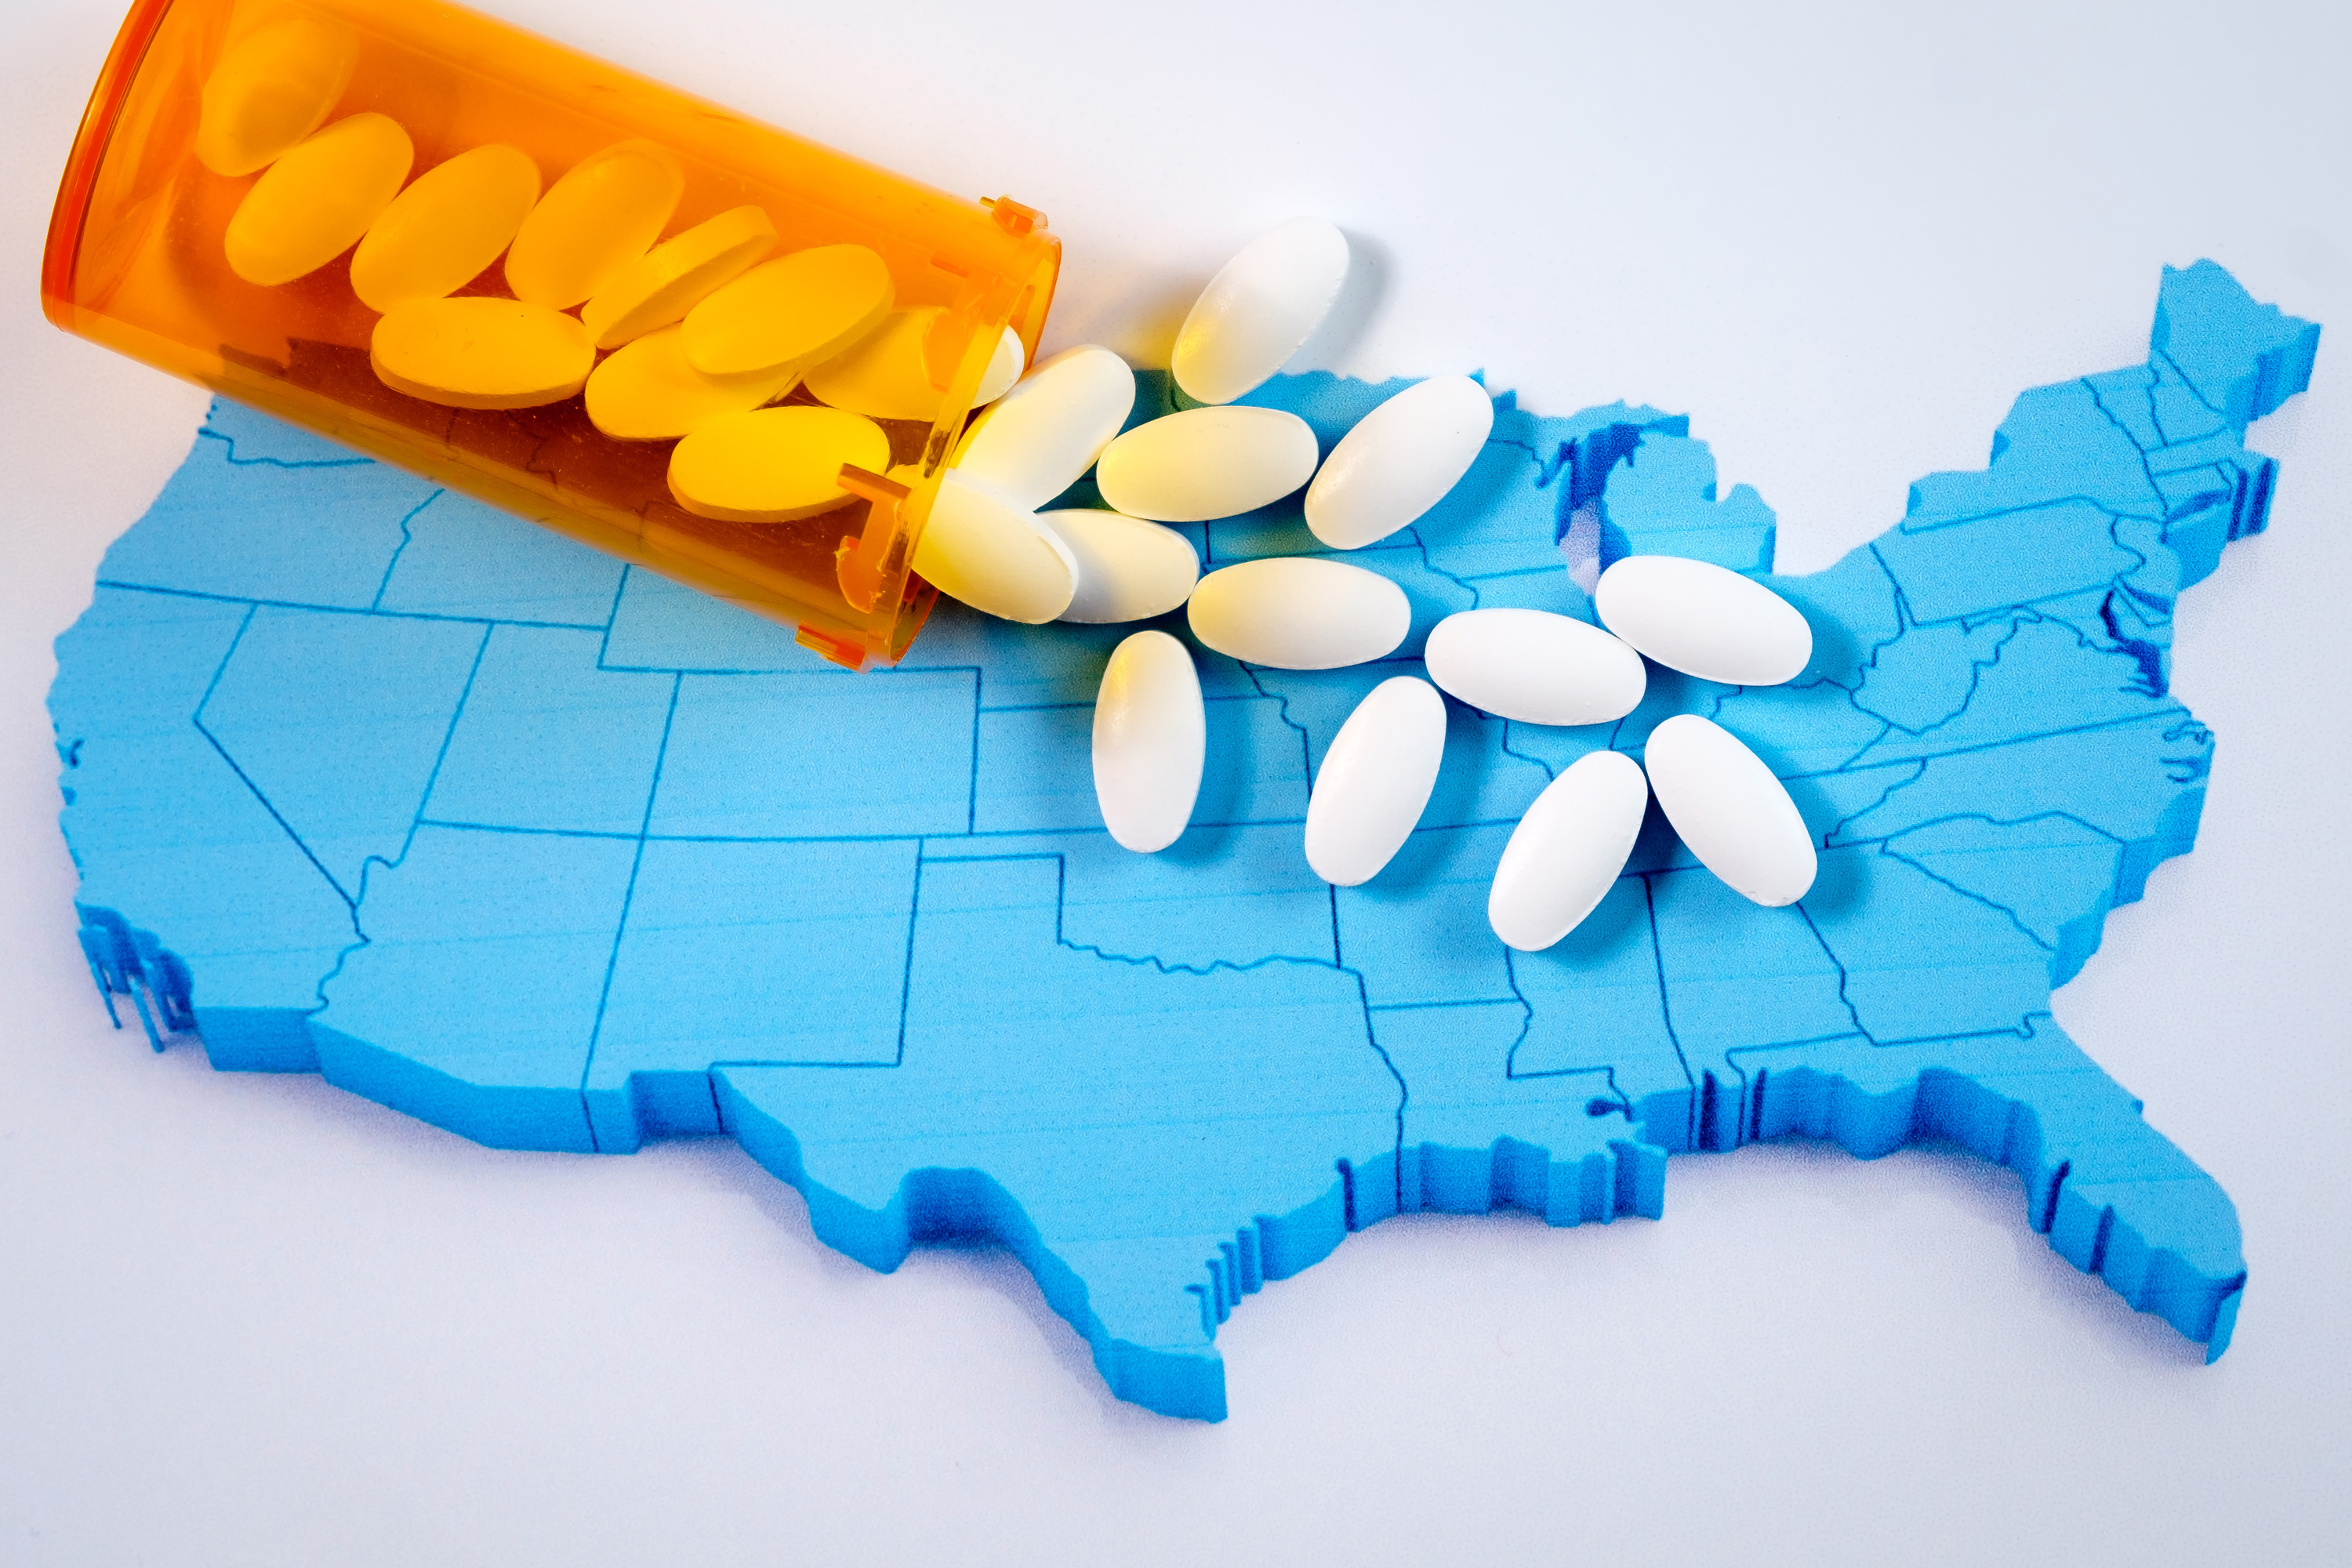 A bottle of pills poured over a map of the U.S.